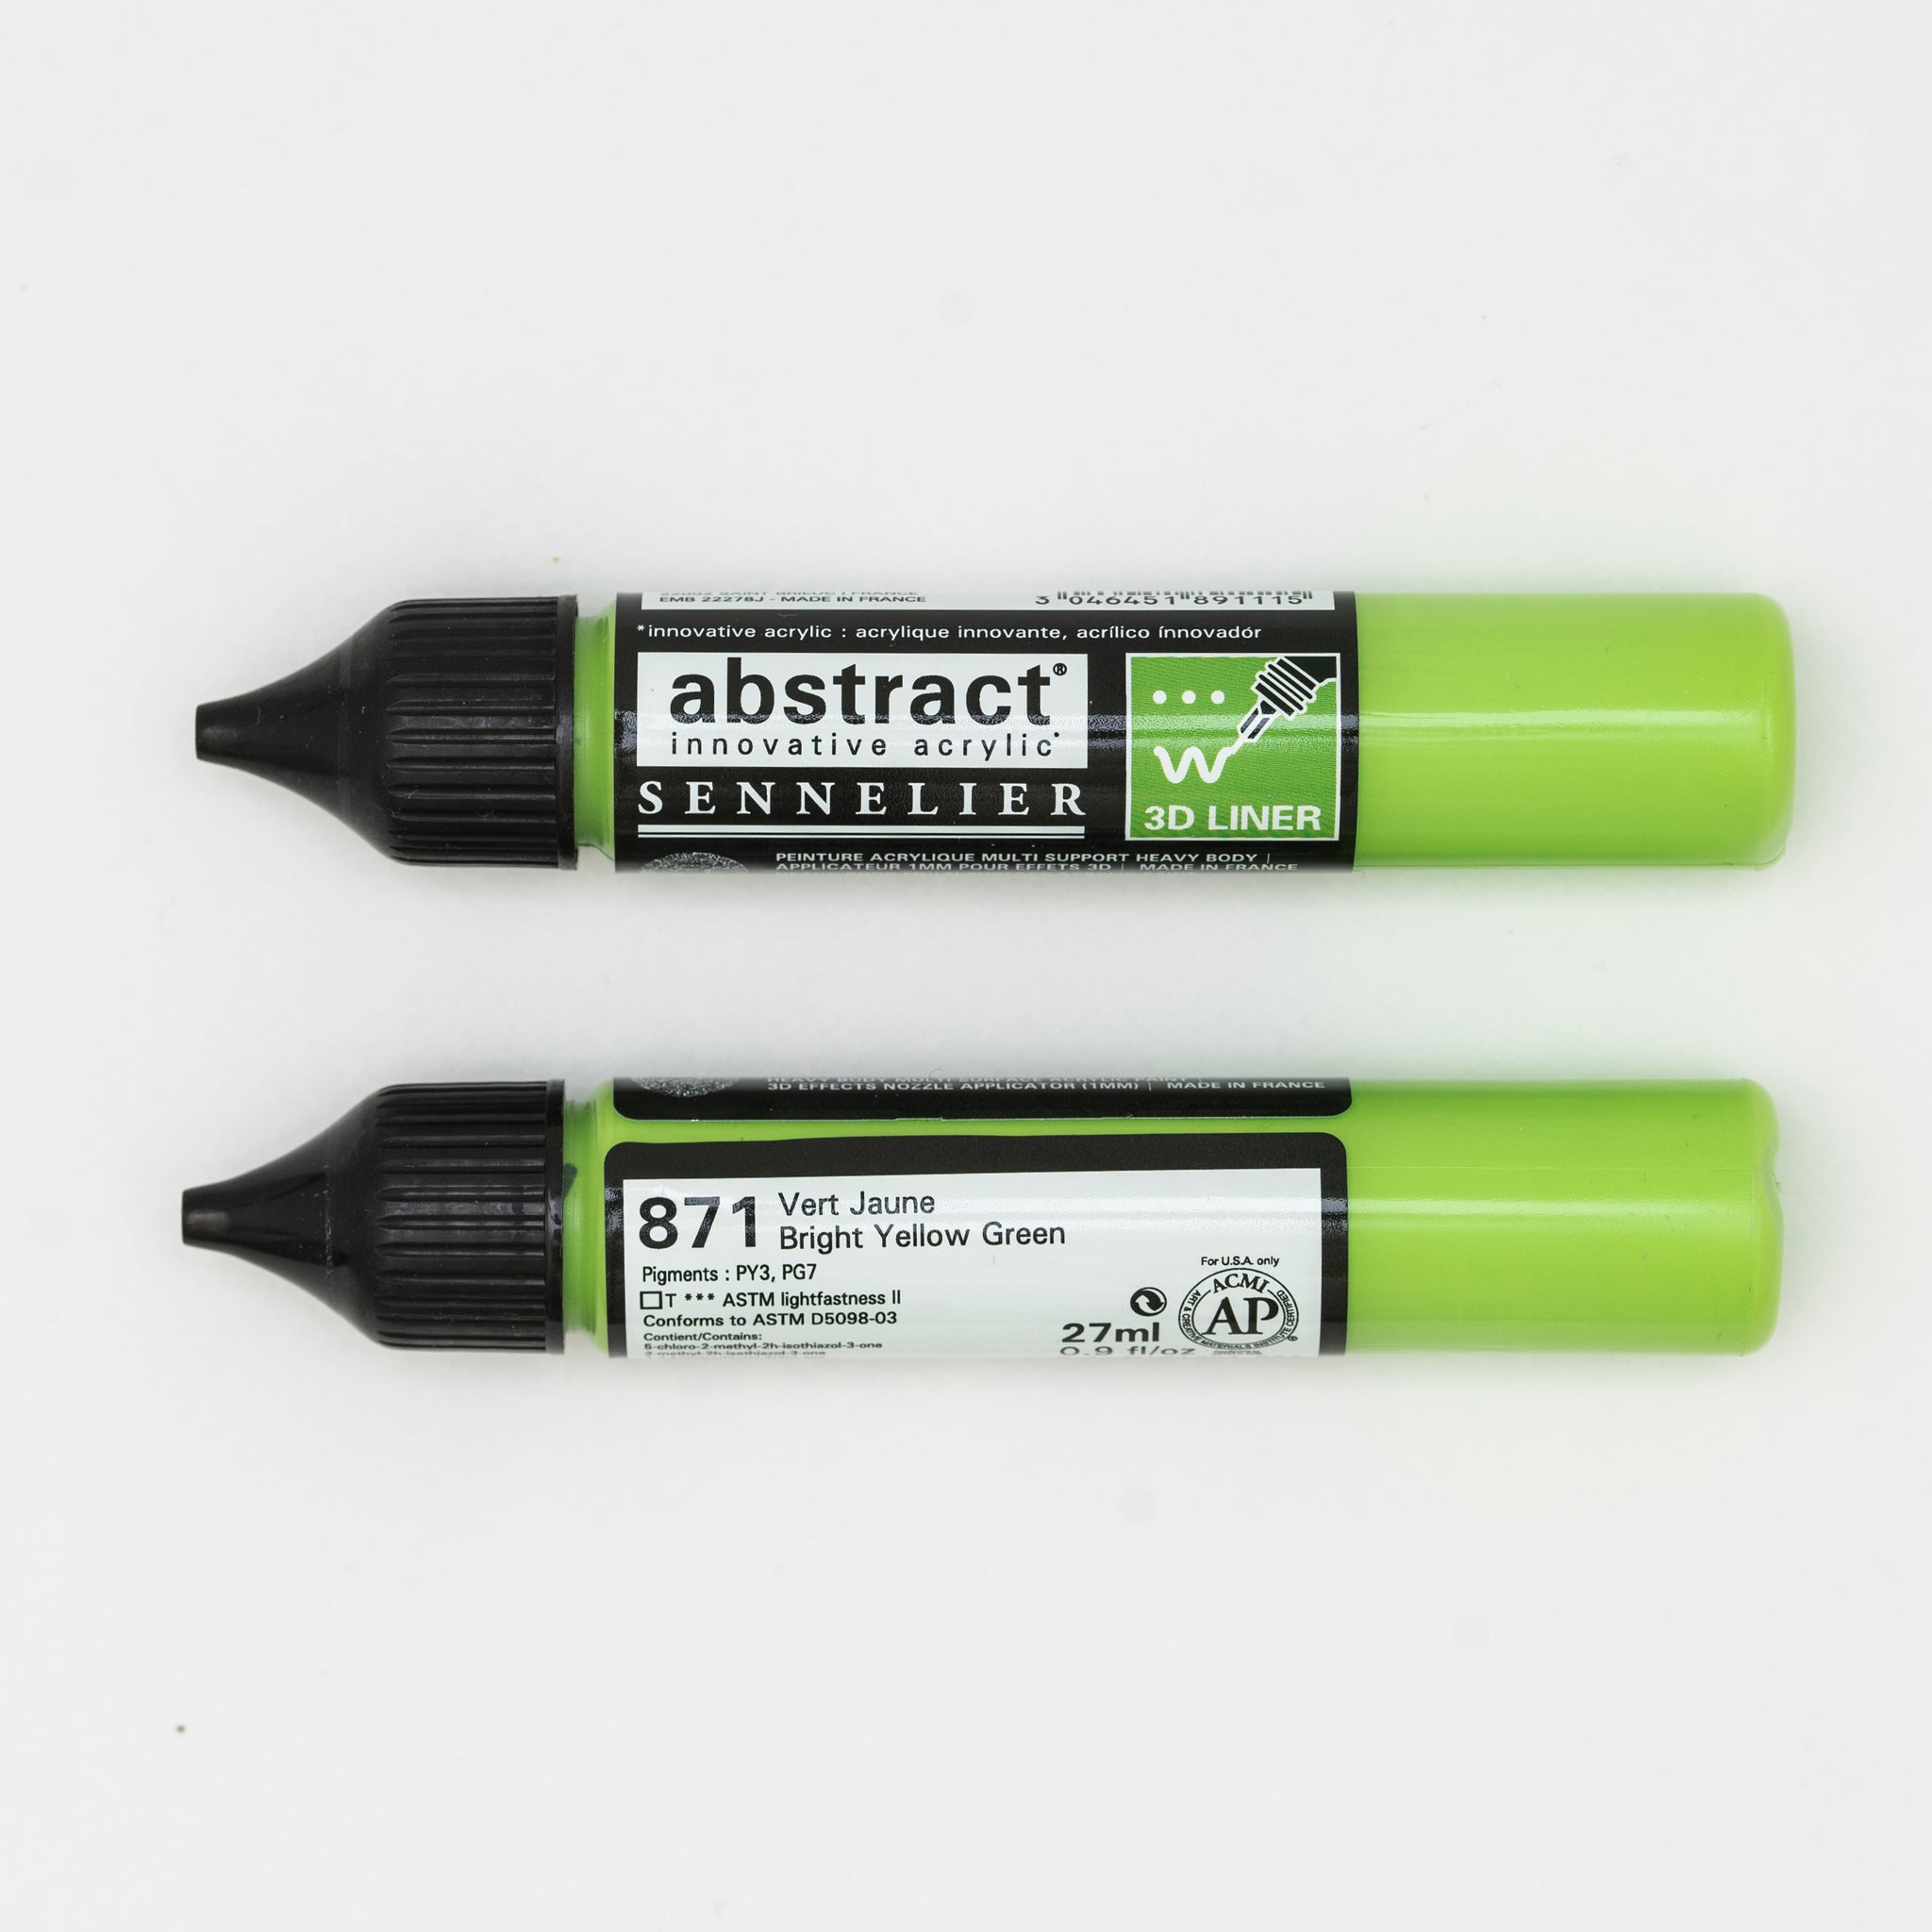 Sennelier Abstract Liner 27ml Bright Yellow Green